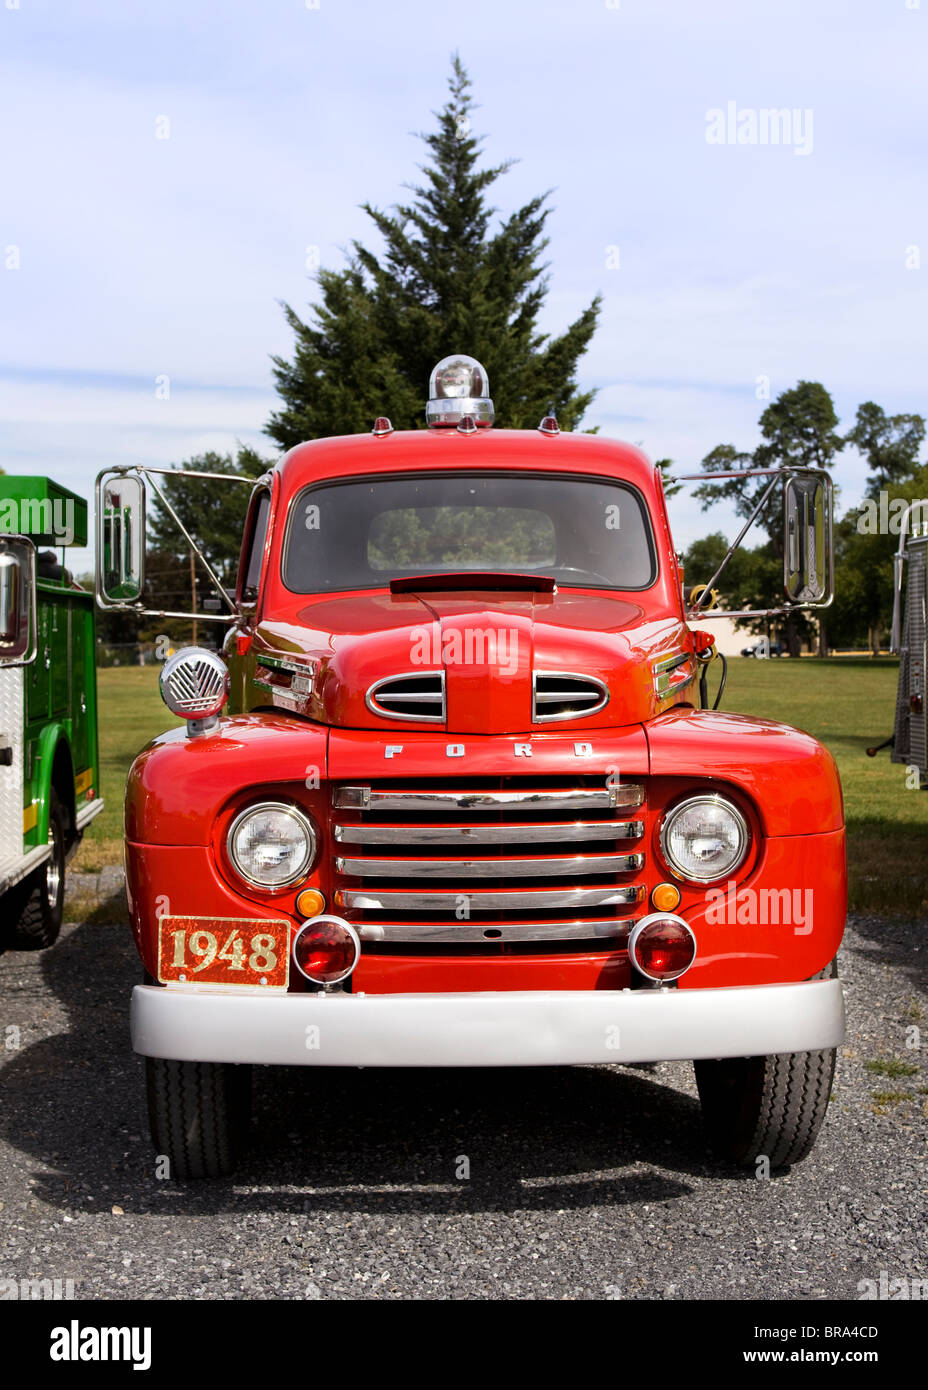 Vintage American 1948 Ford firetruck Stock Photo